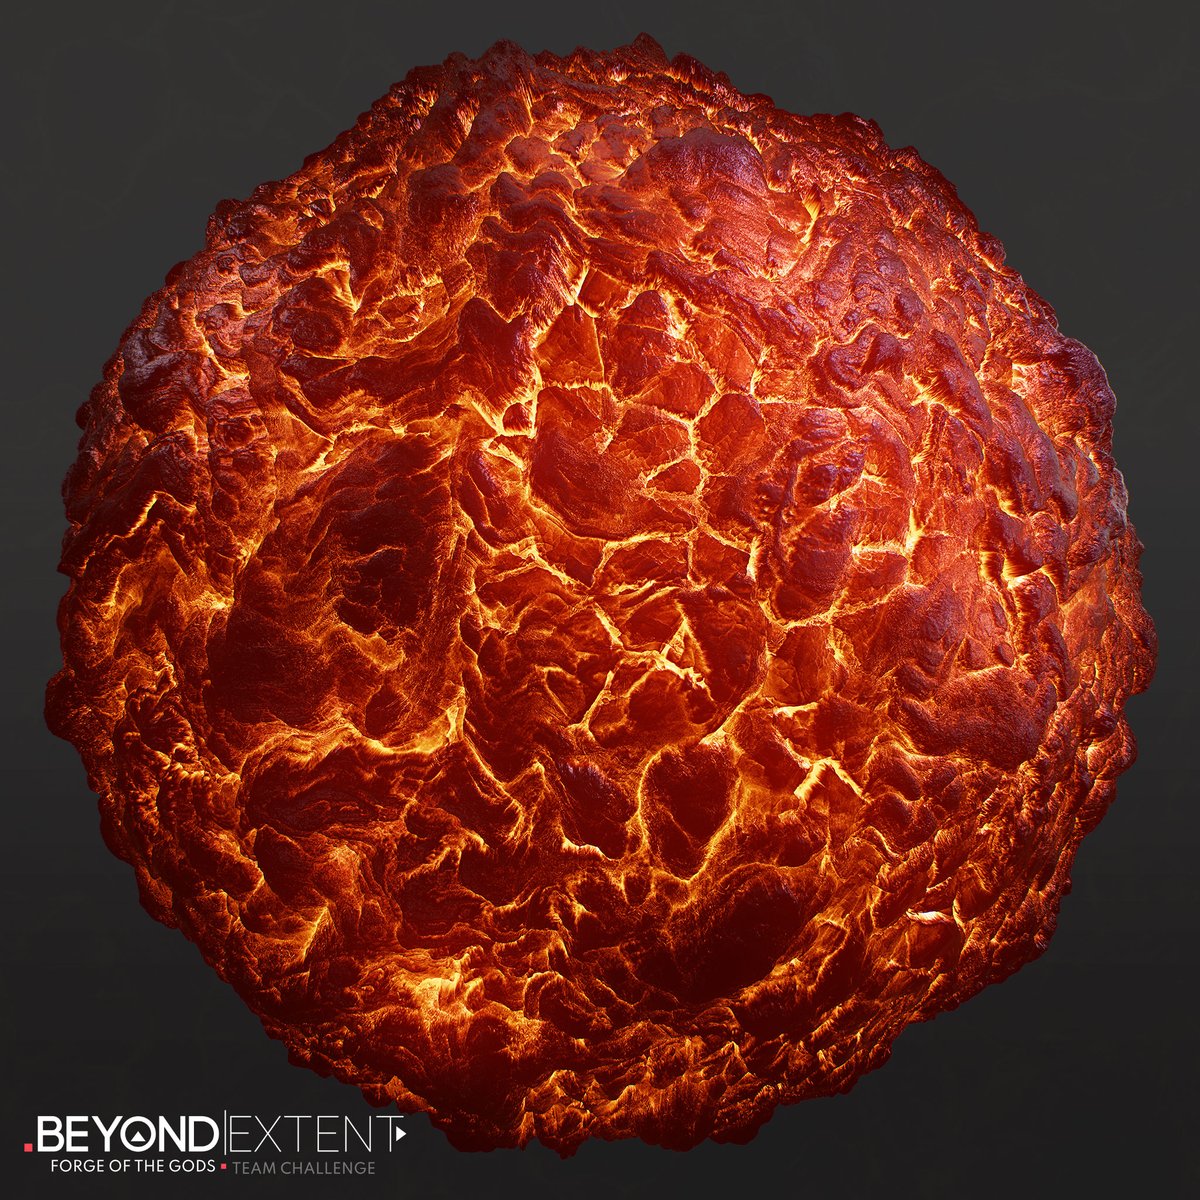 FORGE OF THE GODS MATERIALS / BEYOND EXTENT TEAM CHALLENGE

See here for more materials-artstation.com/artwork/m8NGlE

#beyondextent #textures #materials #gameart #tileable #art #artstation #teamchallenge #substancedesigner #zbrush